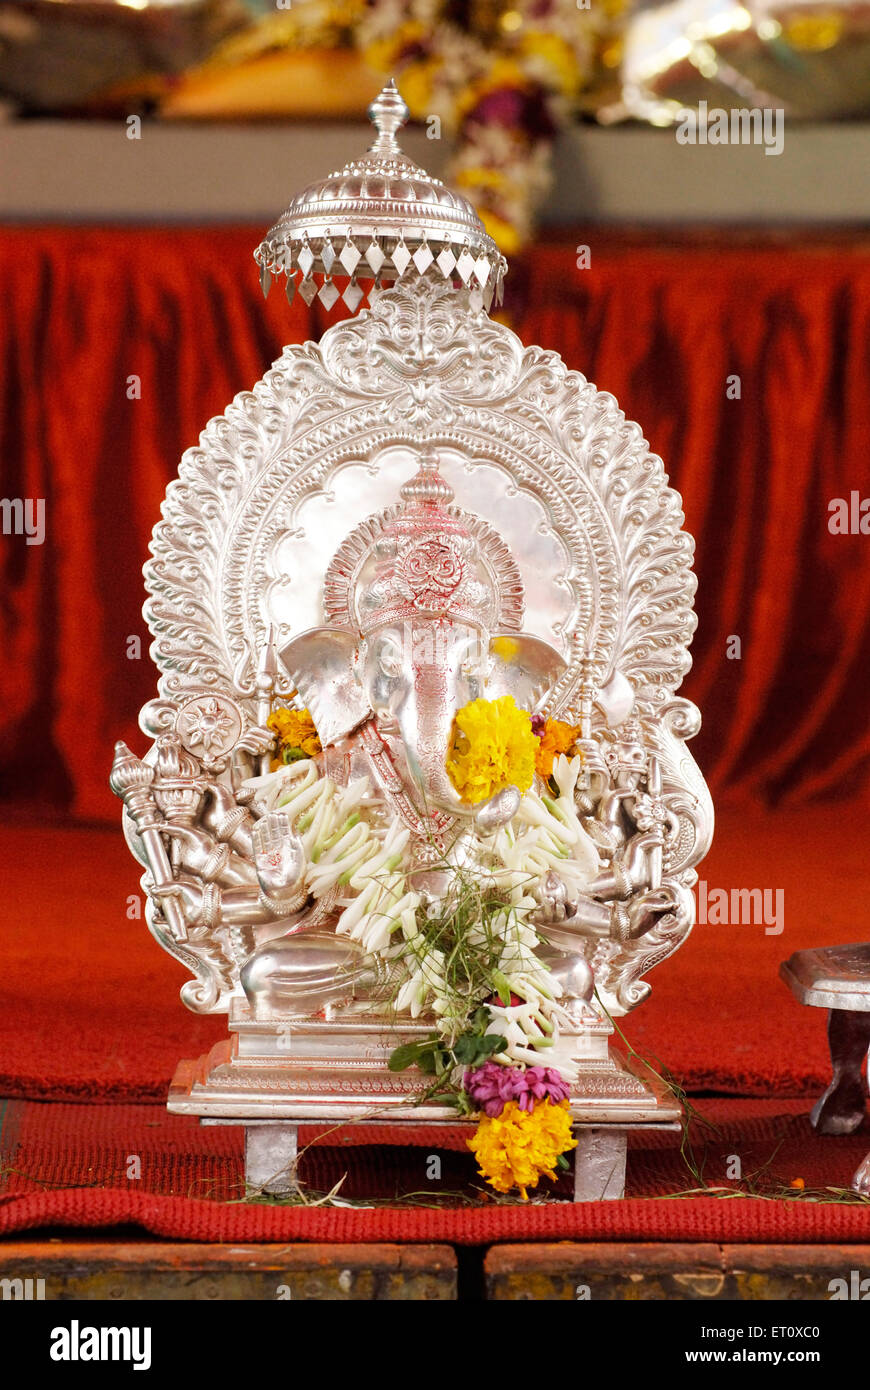 Silver metal idol of lord Ganesh with ten hands dashbhuja ; elephant headed God ; Ganapati festival year 2008 at Pune Stock Photo